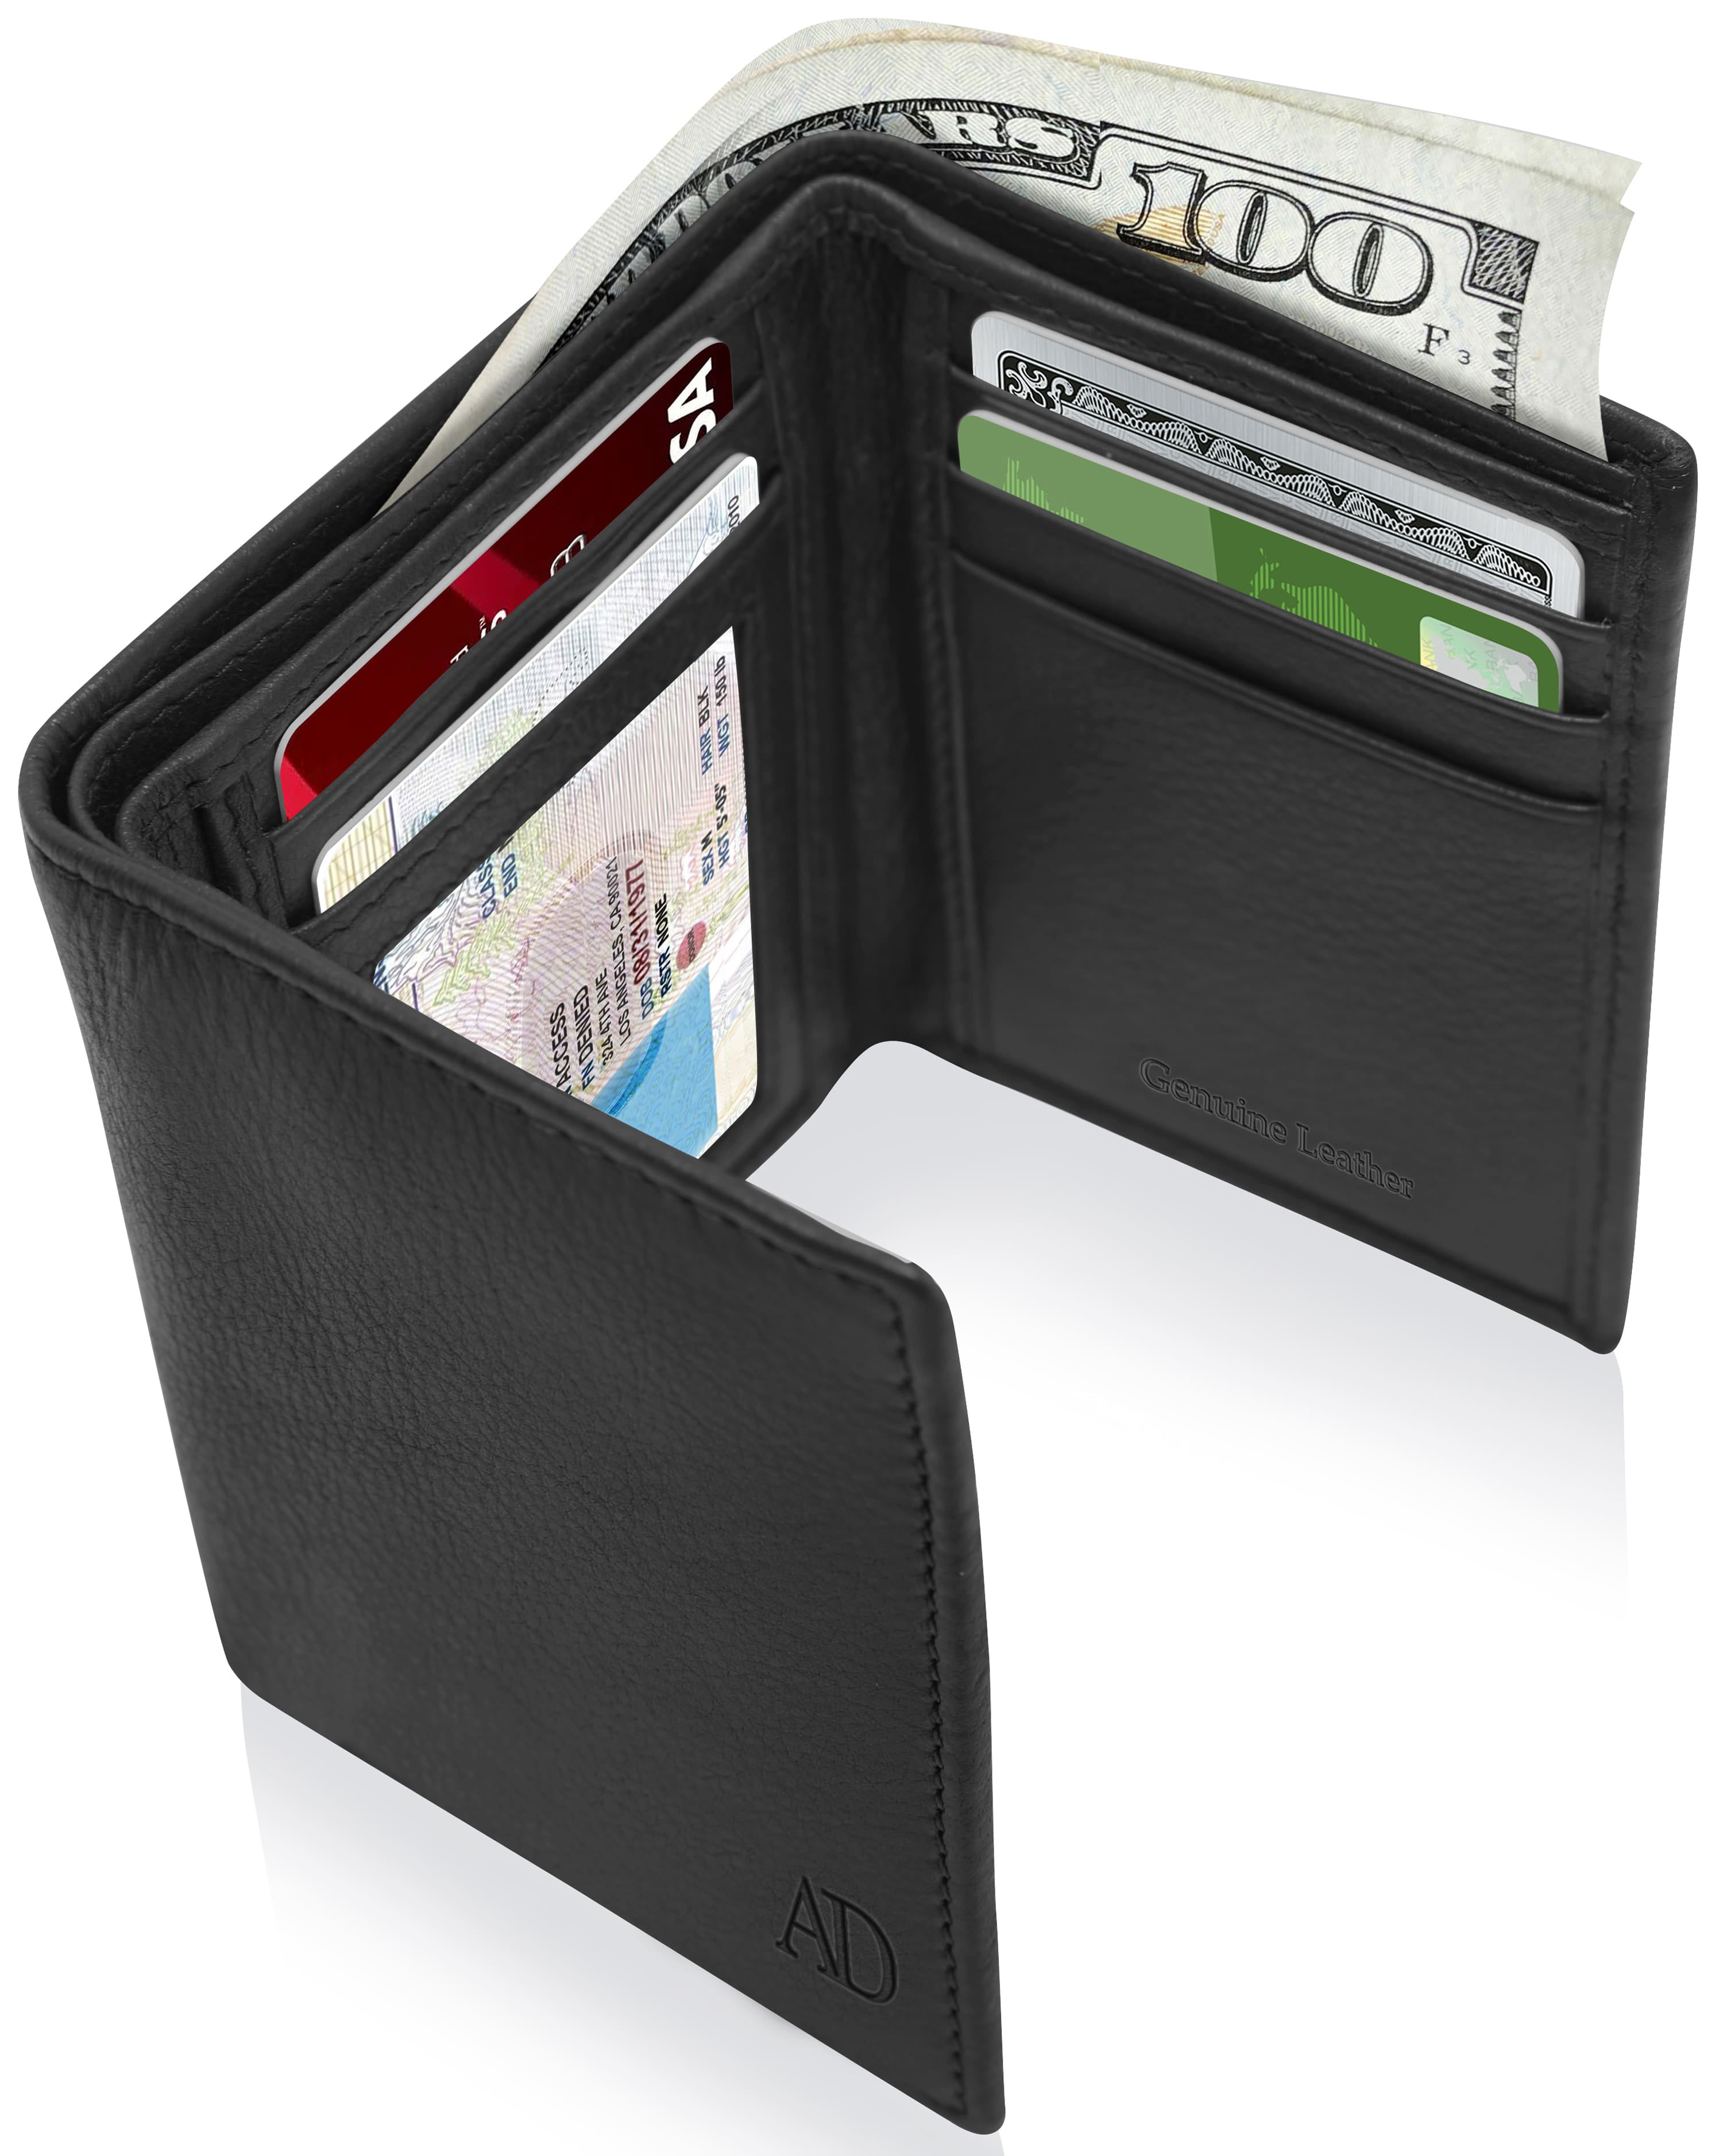 Genuine Leather RFID Blocking Wallet Mens Credit Card Holder Bifold Wallet with Zip Coin Pocket for Men Black with Gift Box Mens Wallet 